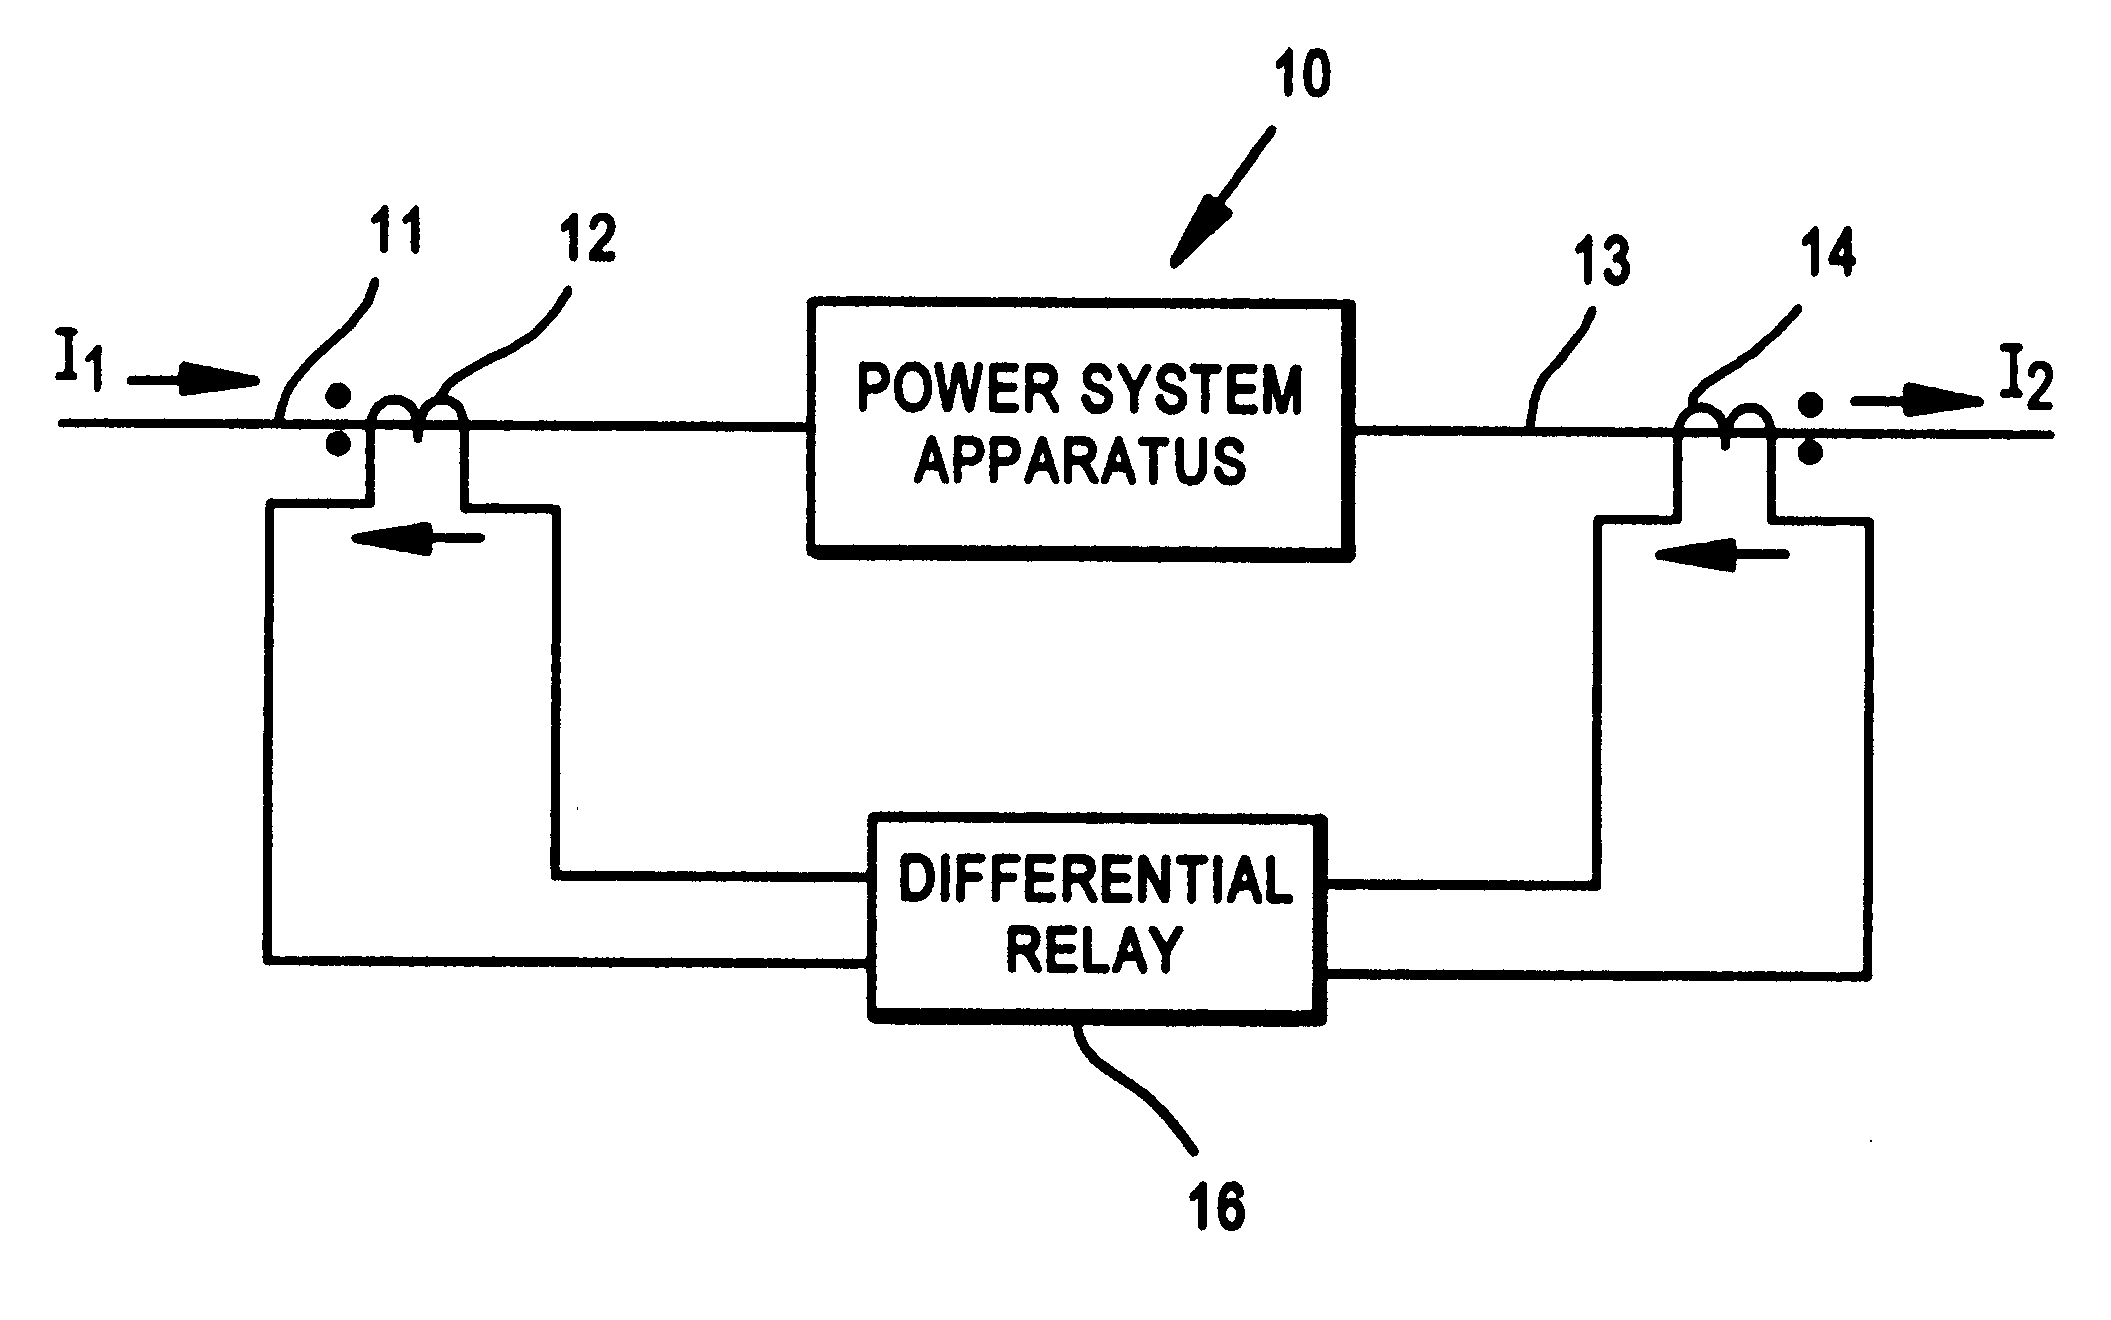 Restraint-type differential relay